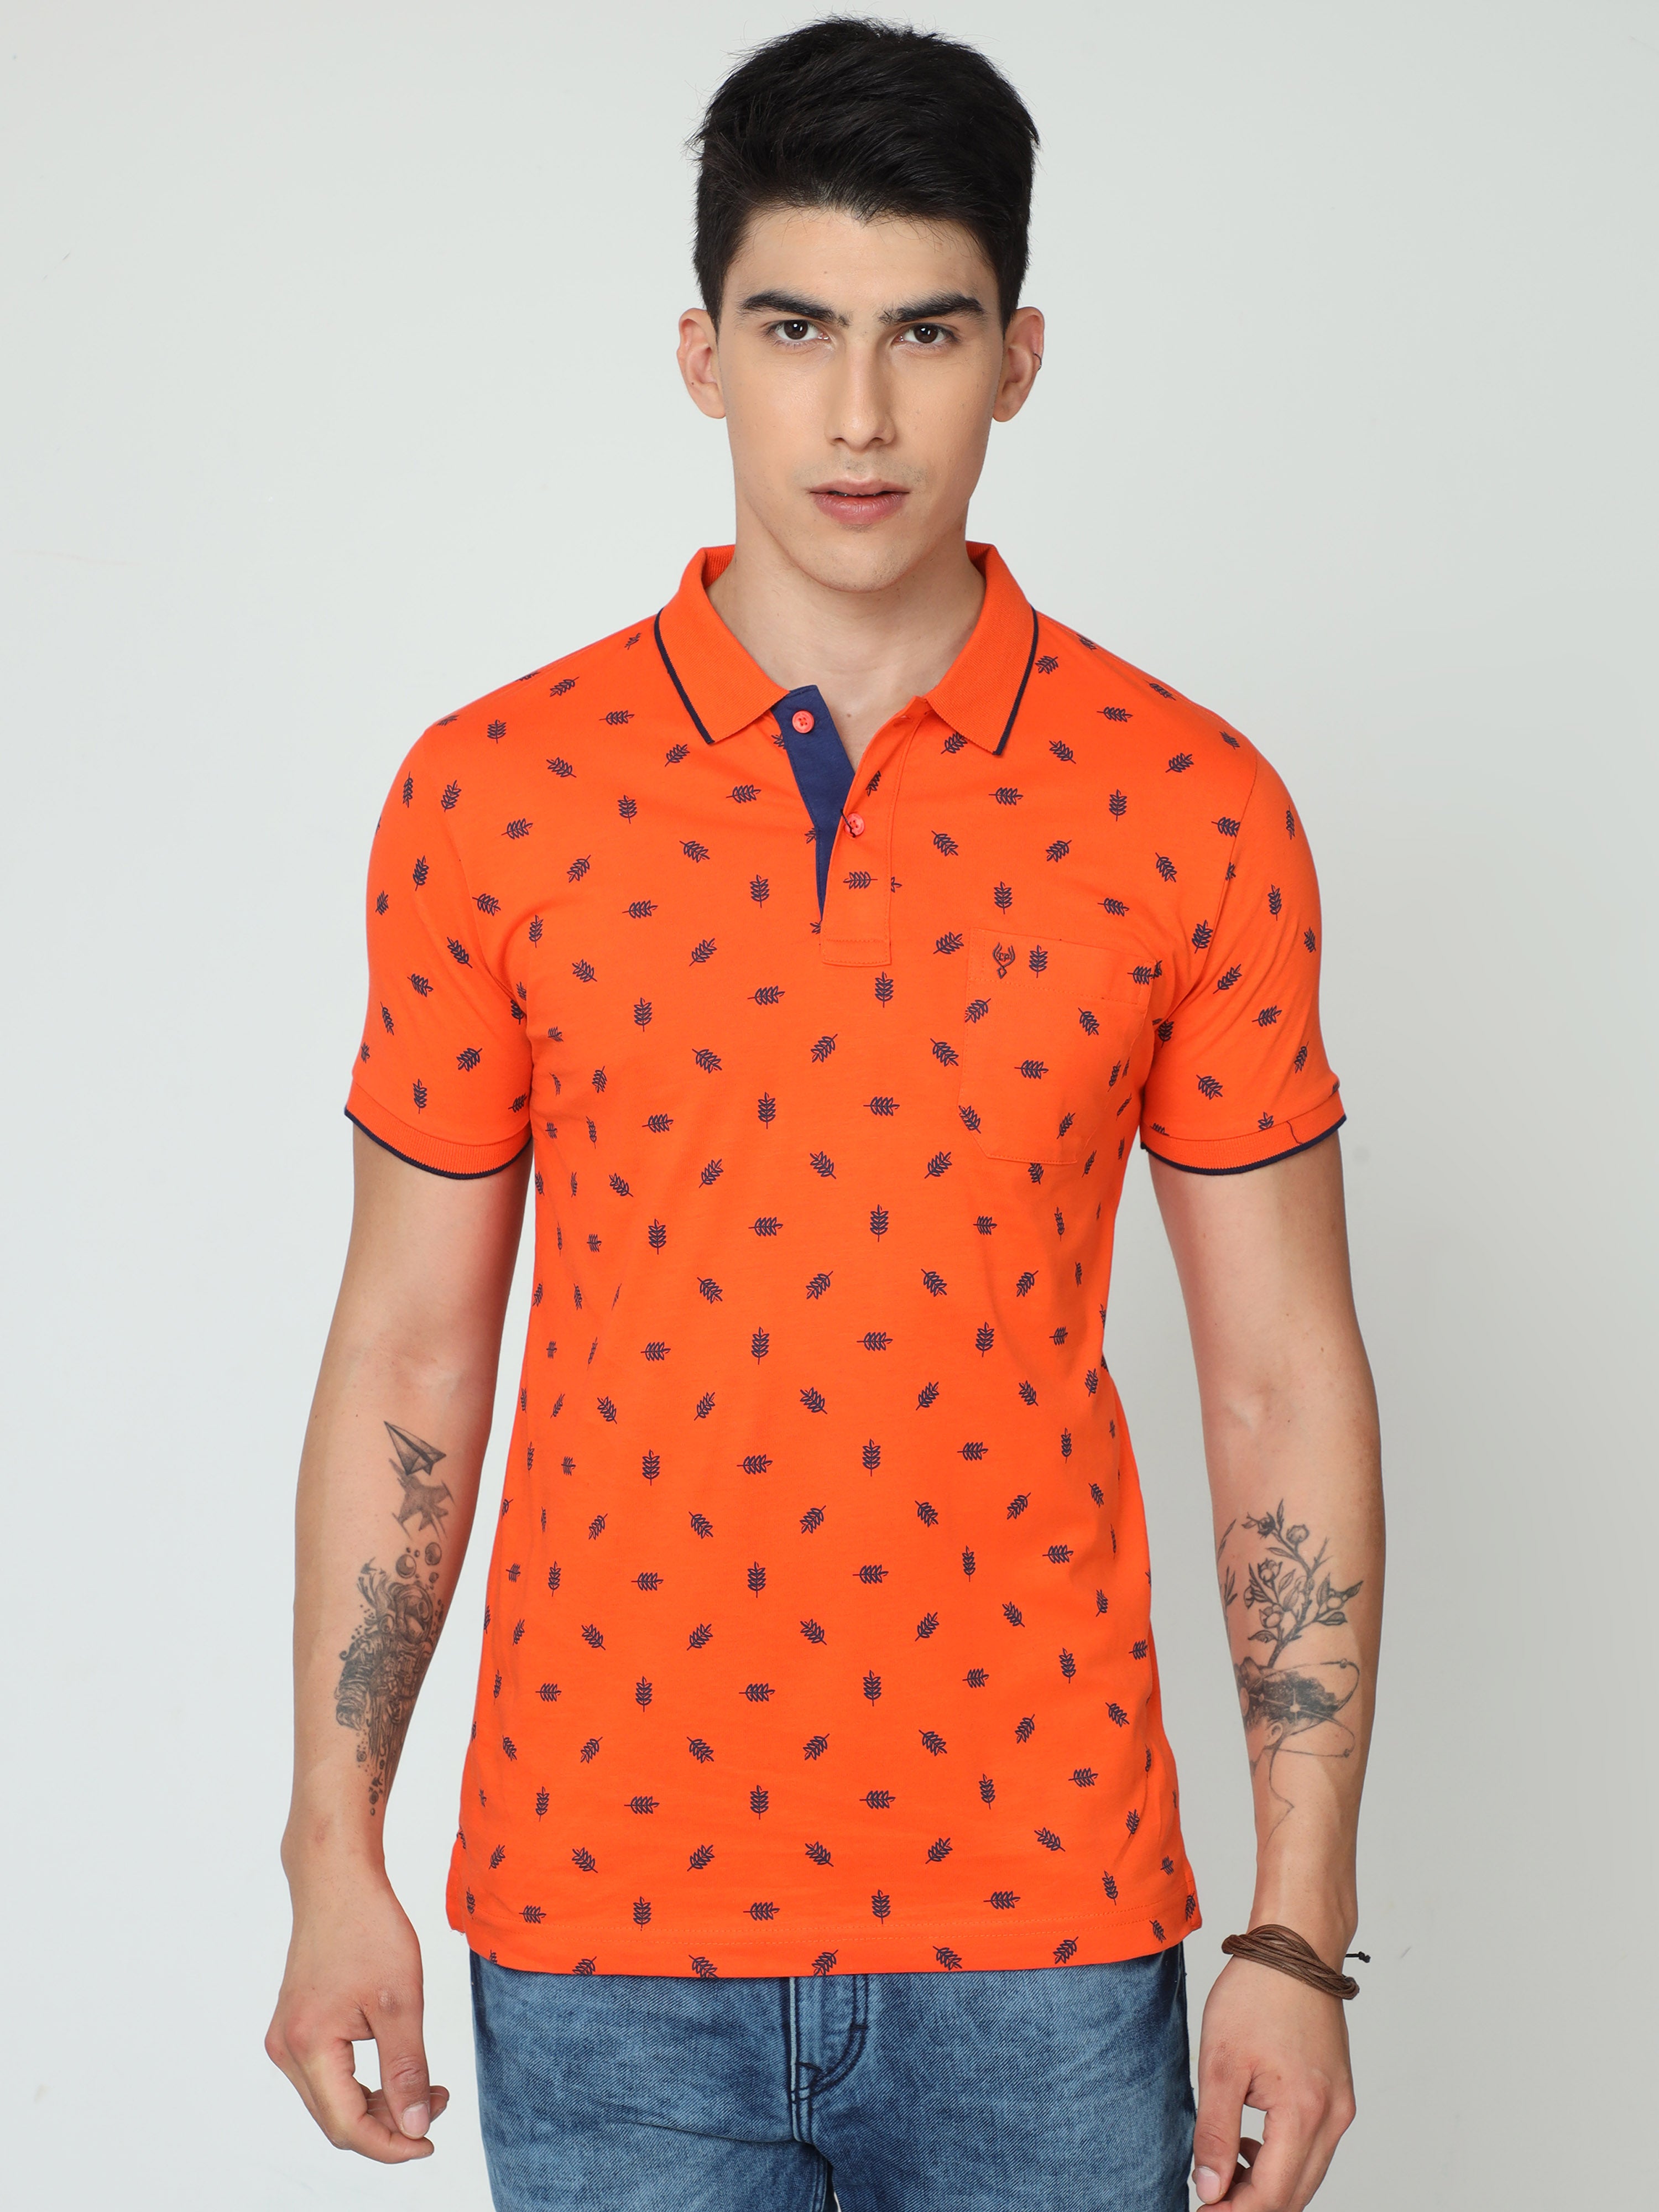 Classic Polo Mens 100% Cotton Orange Printed Polo Neck Half Sleeves Slim Fit T-Shirt |Cp-Polo Neck-01